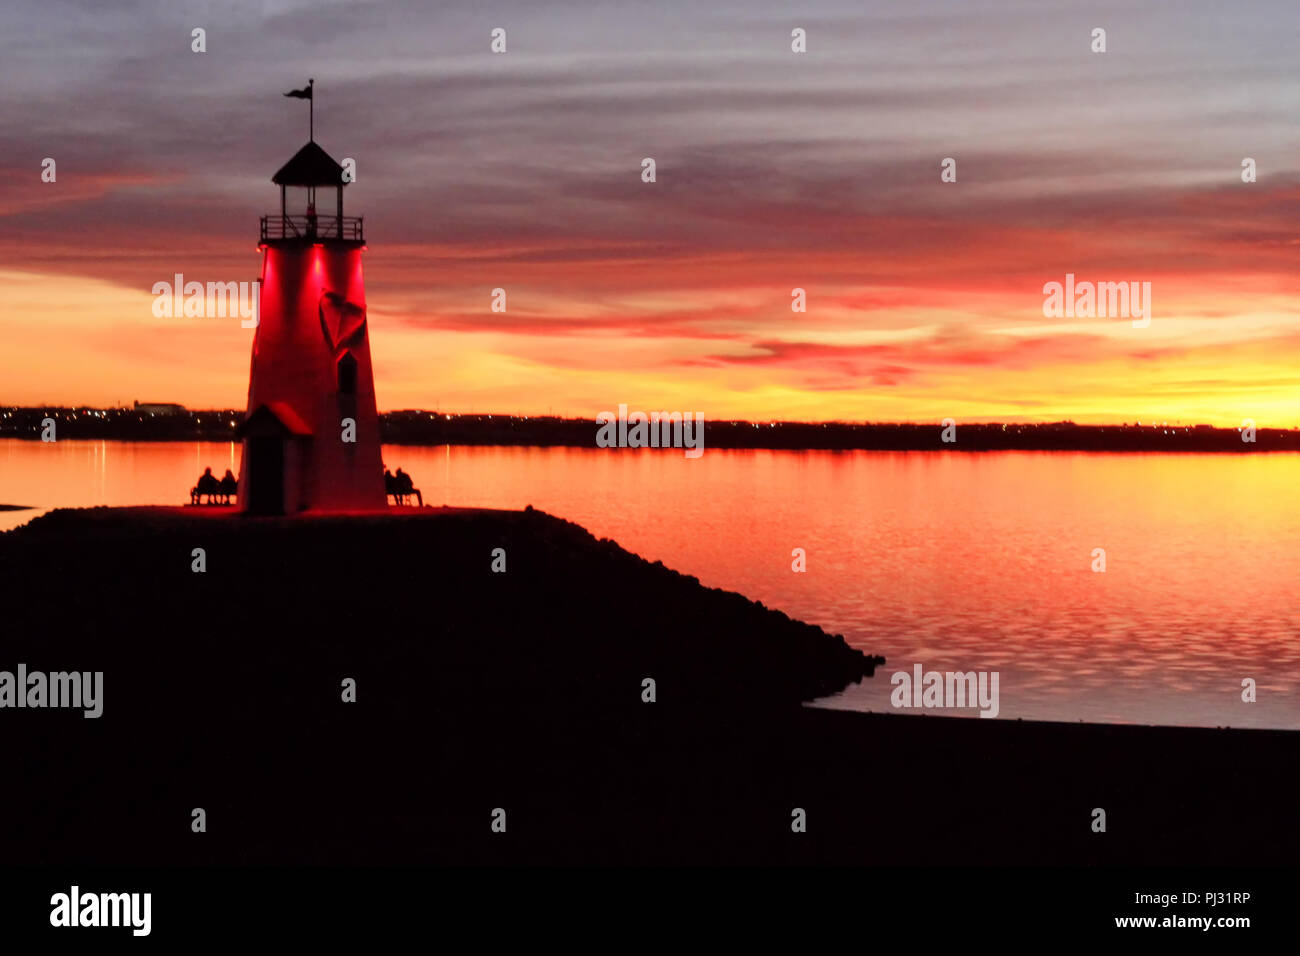 The lighthouse at Lake Hefner's East Wharf in Oklahoma City is lit up red against a colorful cloudy sunset, with people on benches. Stock Photo